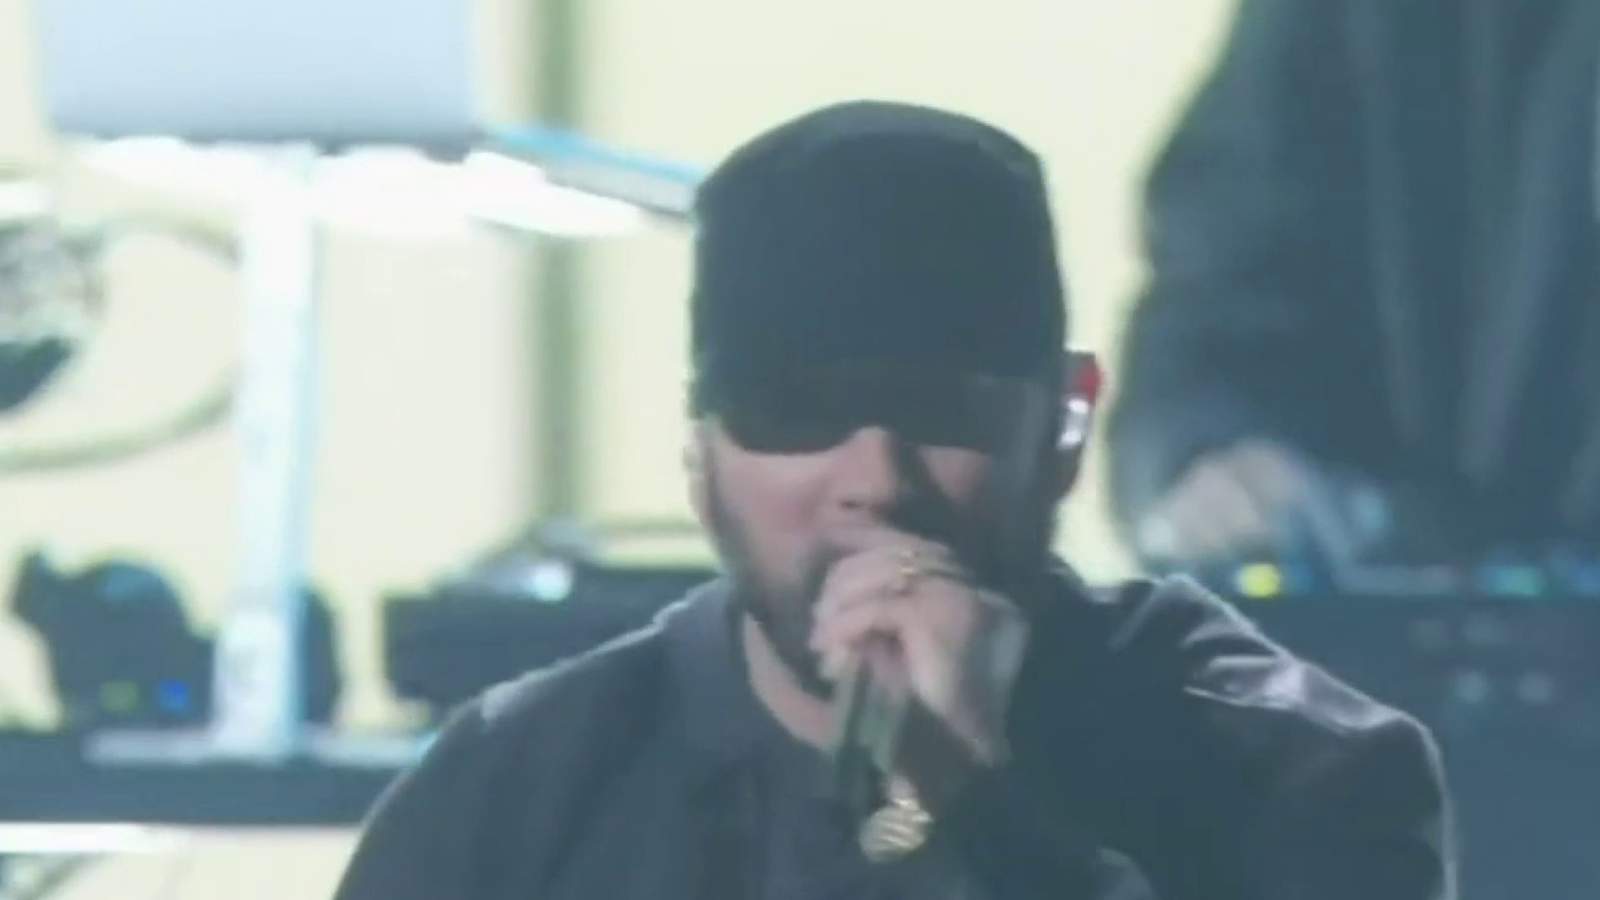 Eminem performs 'Lose Yourself' at 2020 Oscars